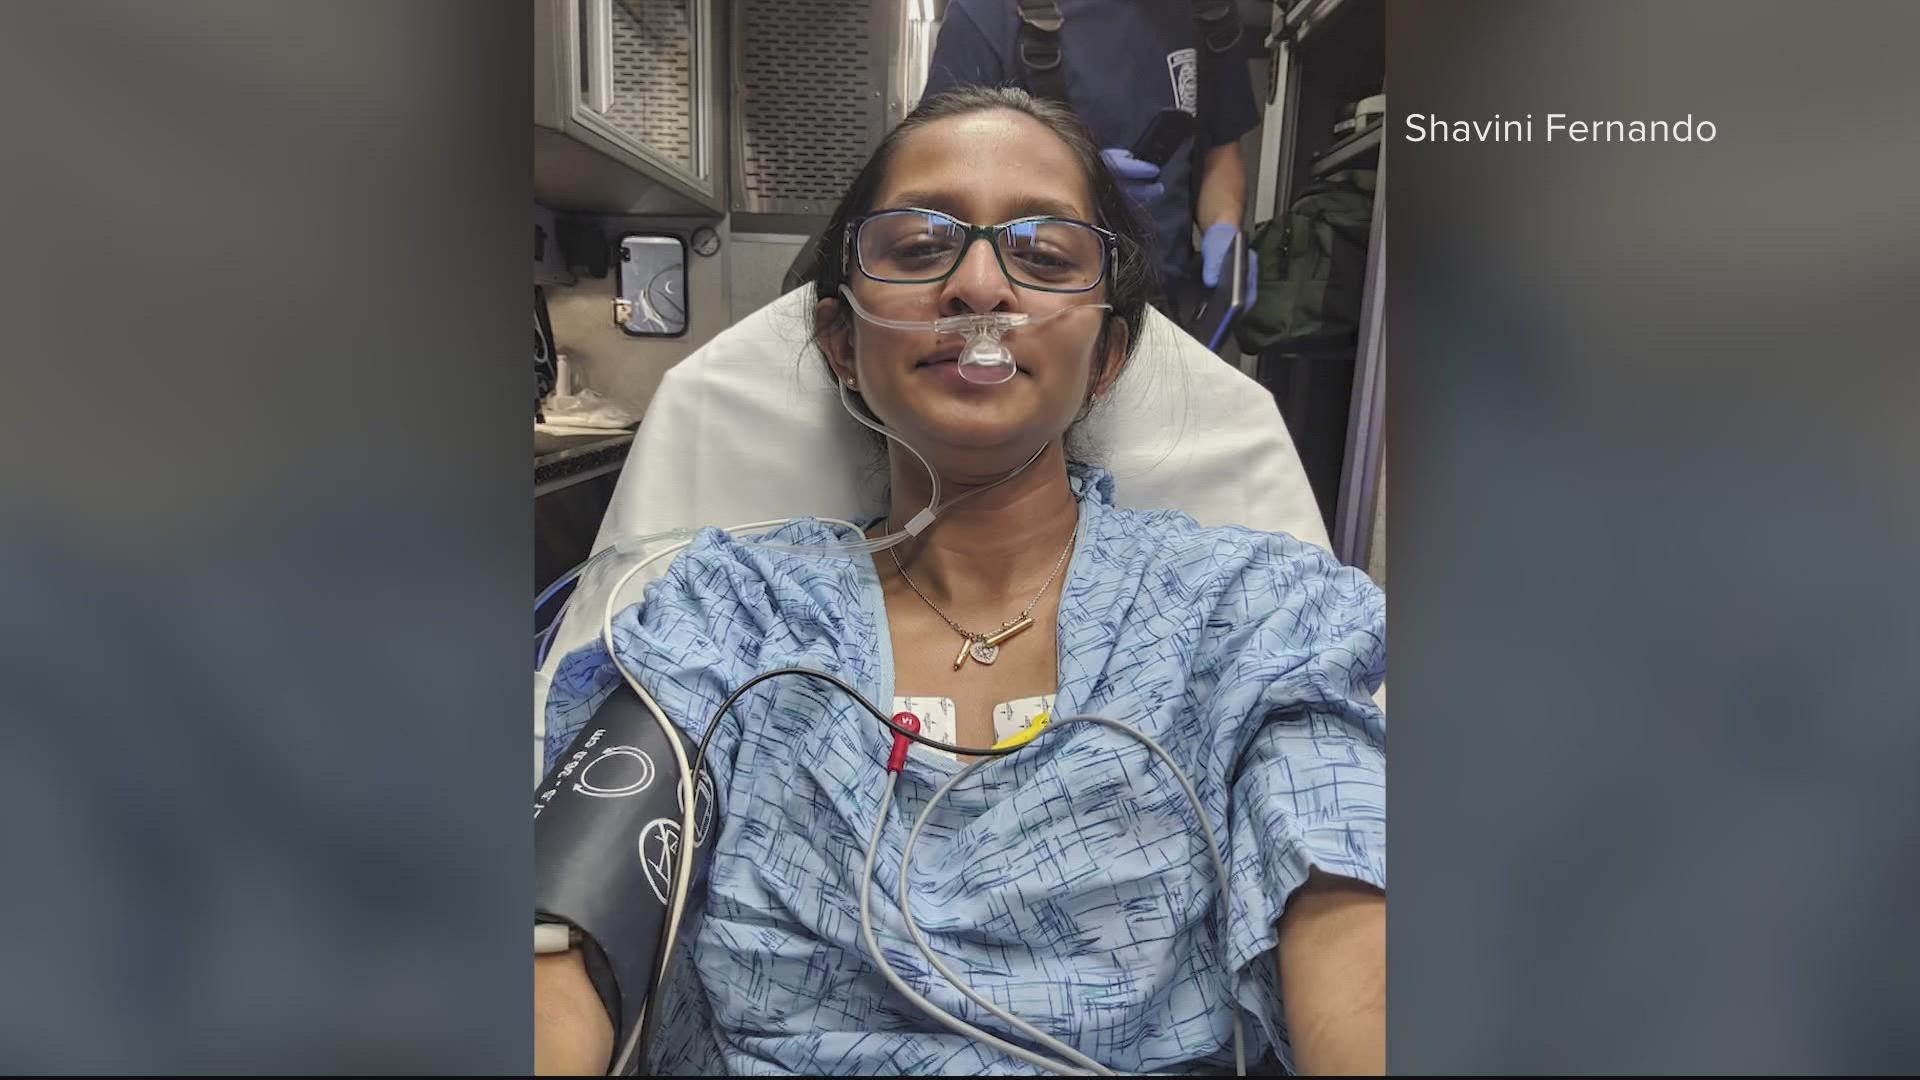 Today, we take Mic'd Up one step further – and hear from Shavini Fernando. A woman in Arlington who invented a product meant to save lives. Including -- her own.